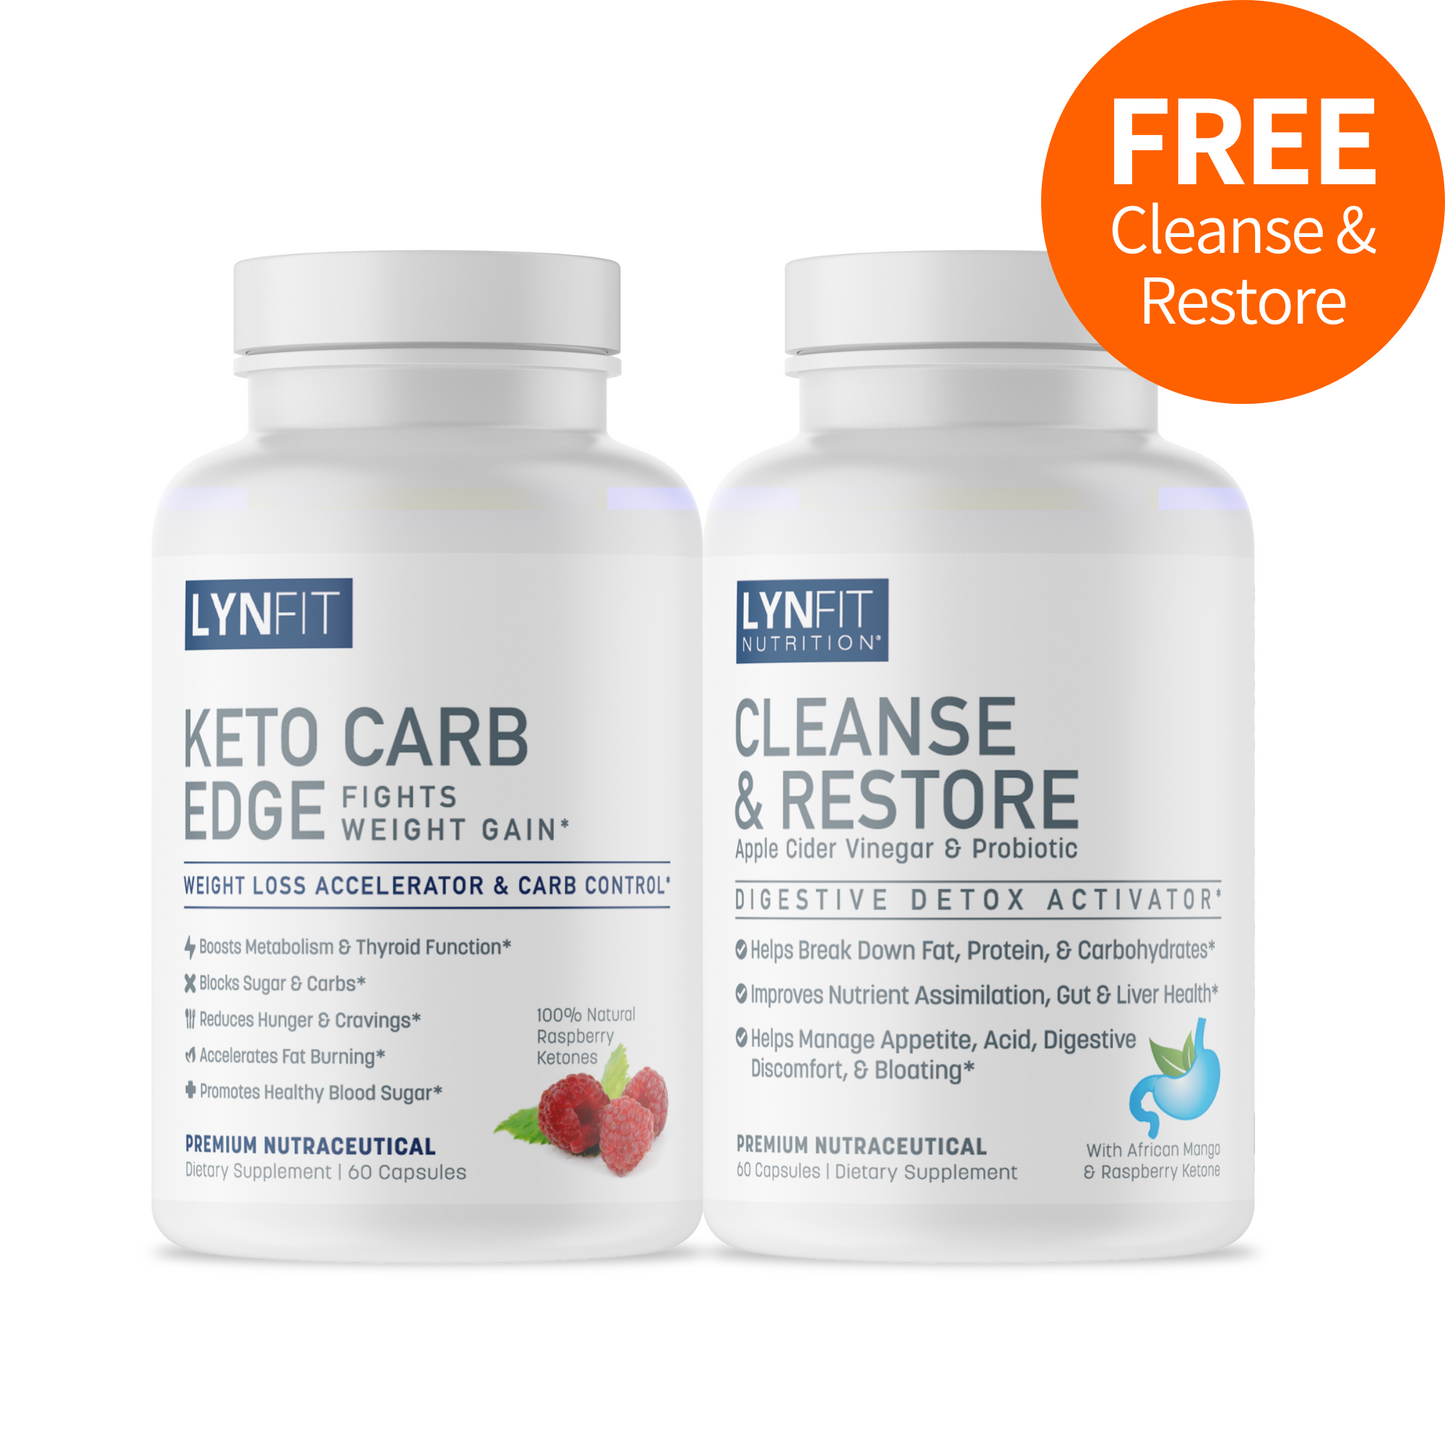 NEWSLETTER SPECIAL:  (1) Keto Carb Edge + (1) FREE Cleanse & Restore | 2 pcs.